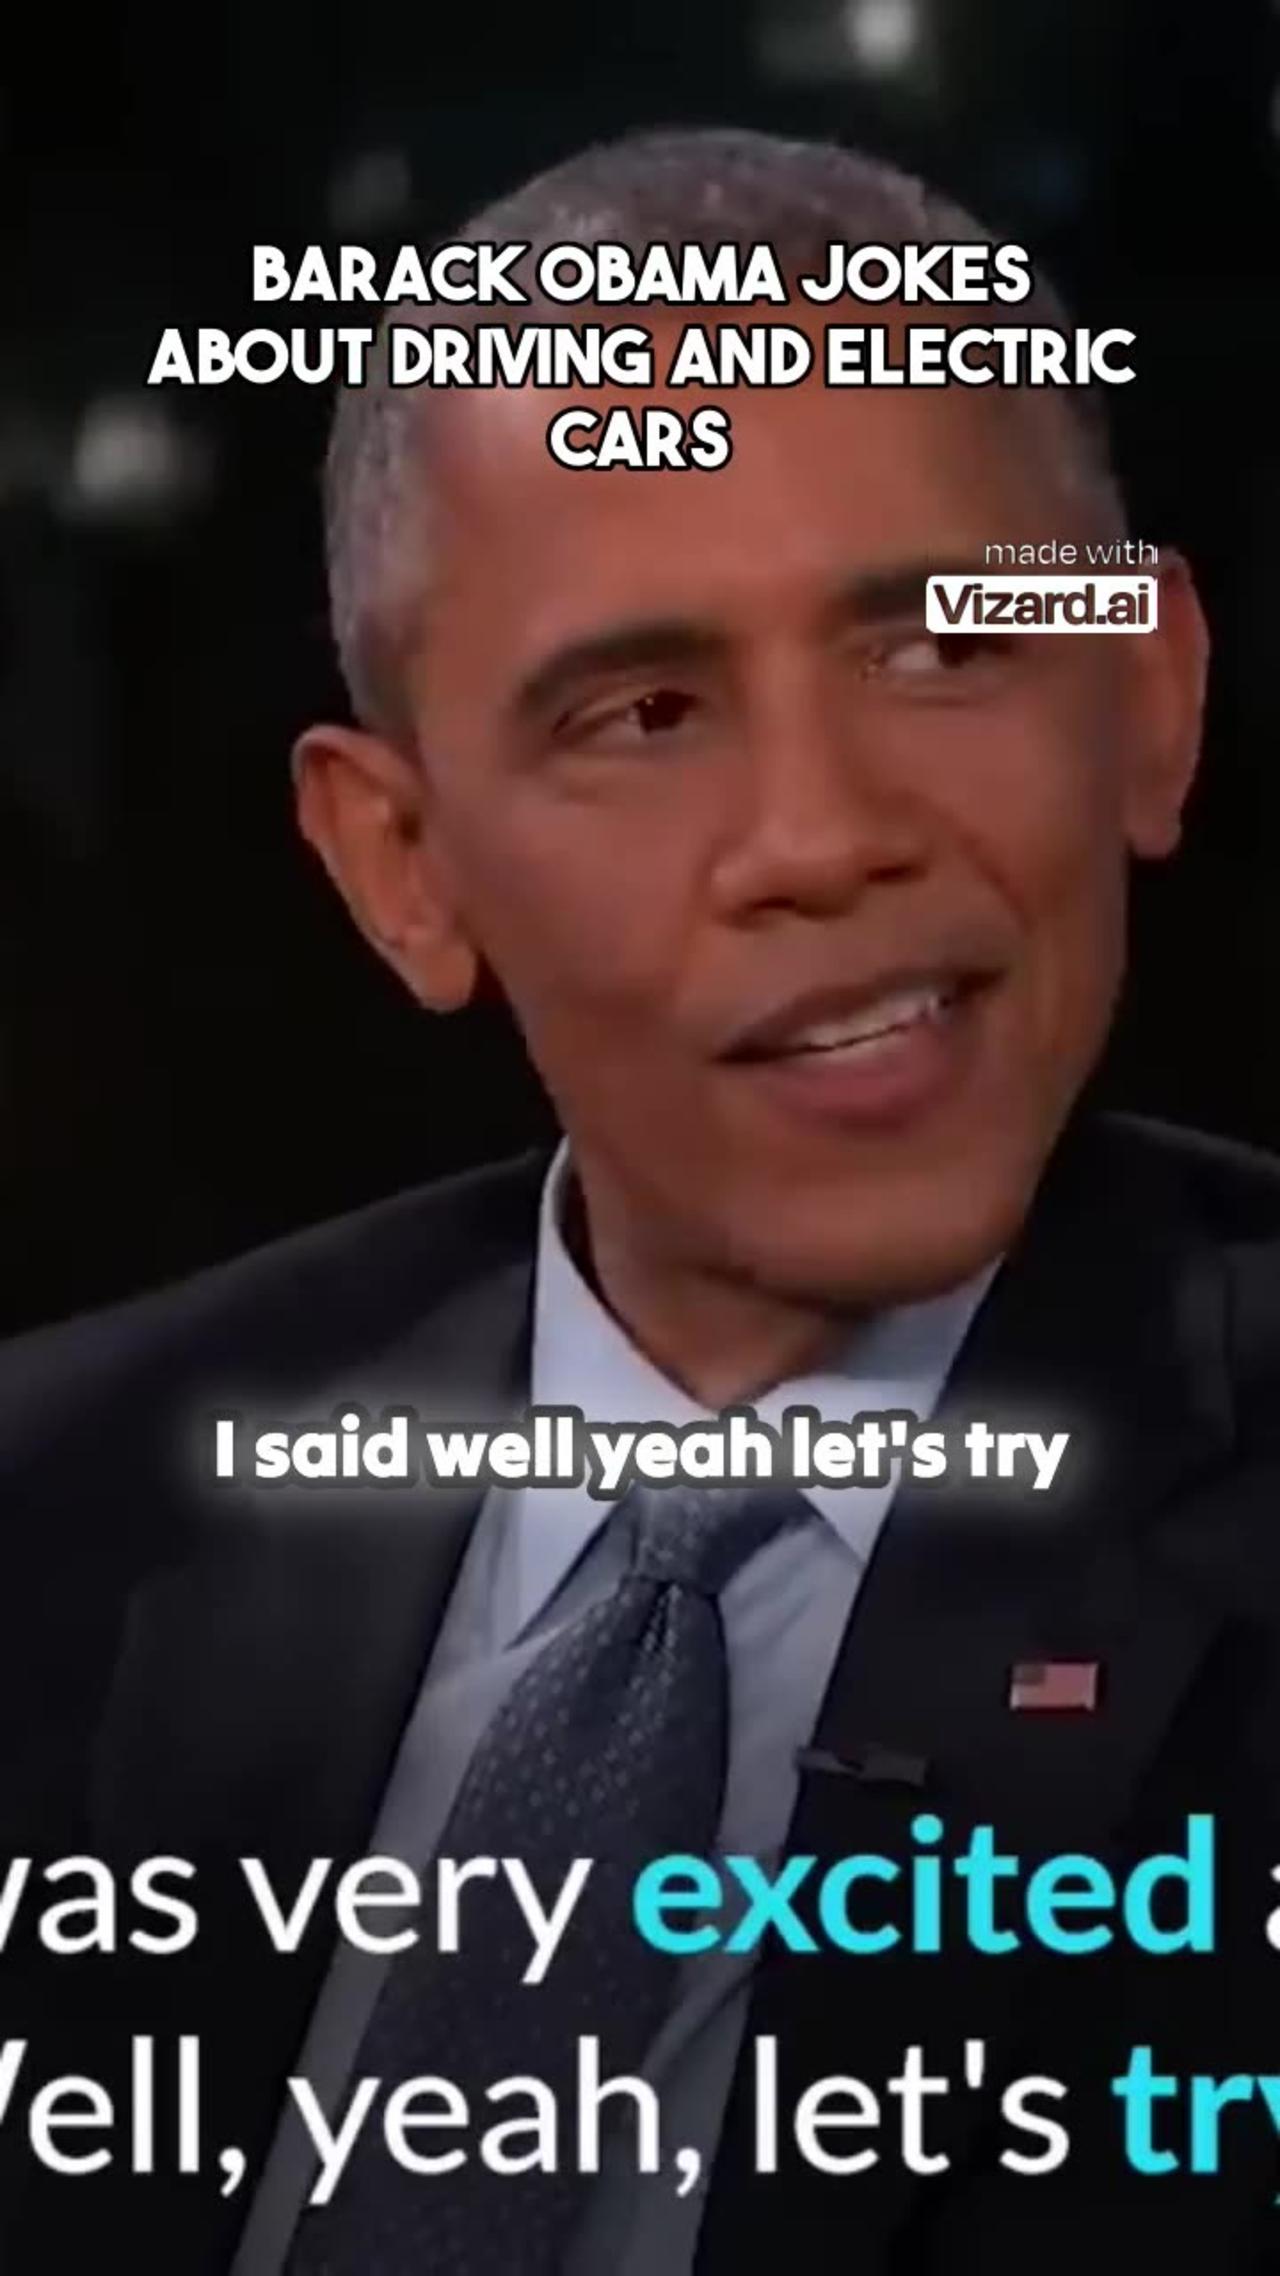 Barack Obama jokes about driving and electric cars